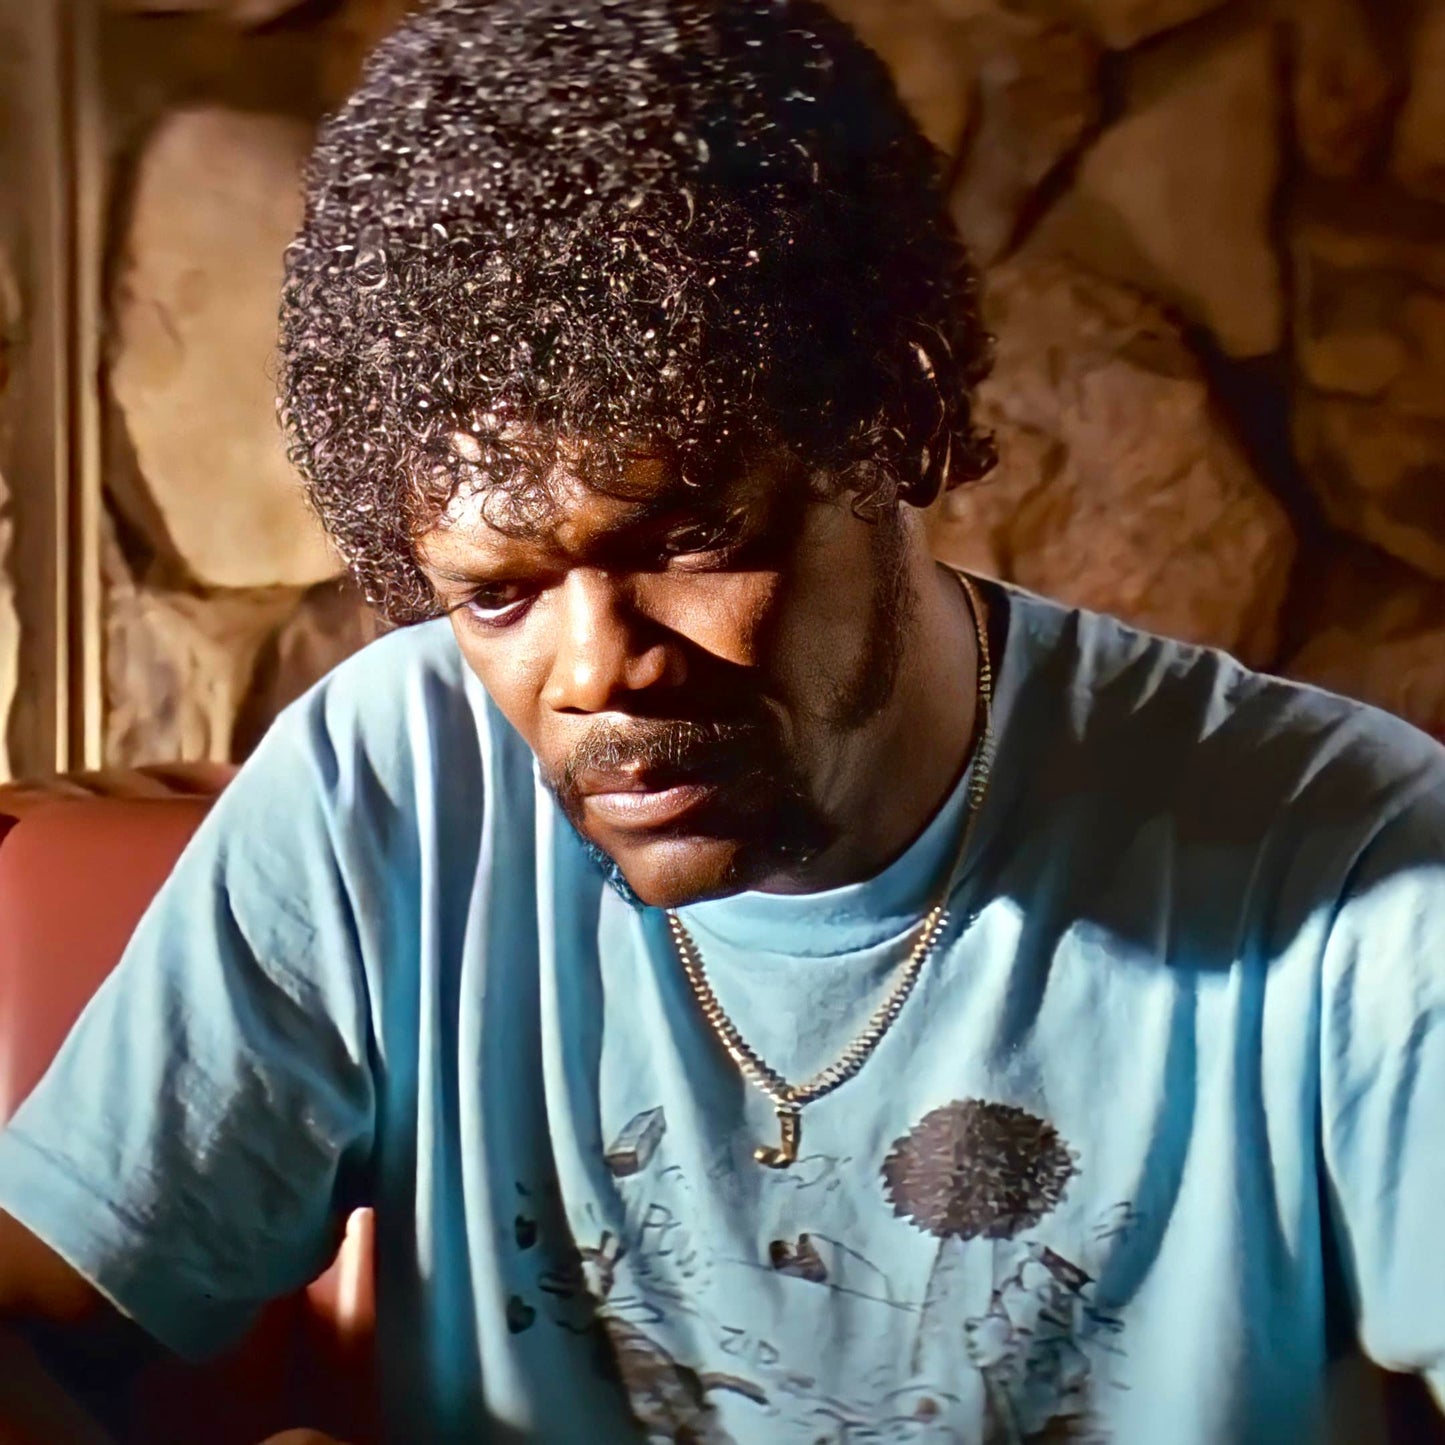 Pulp Fiction Jules Winnfield T-Shirt: Pay homage to the iconic character with our exclusive design